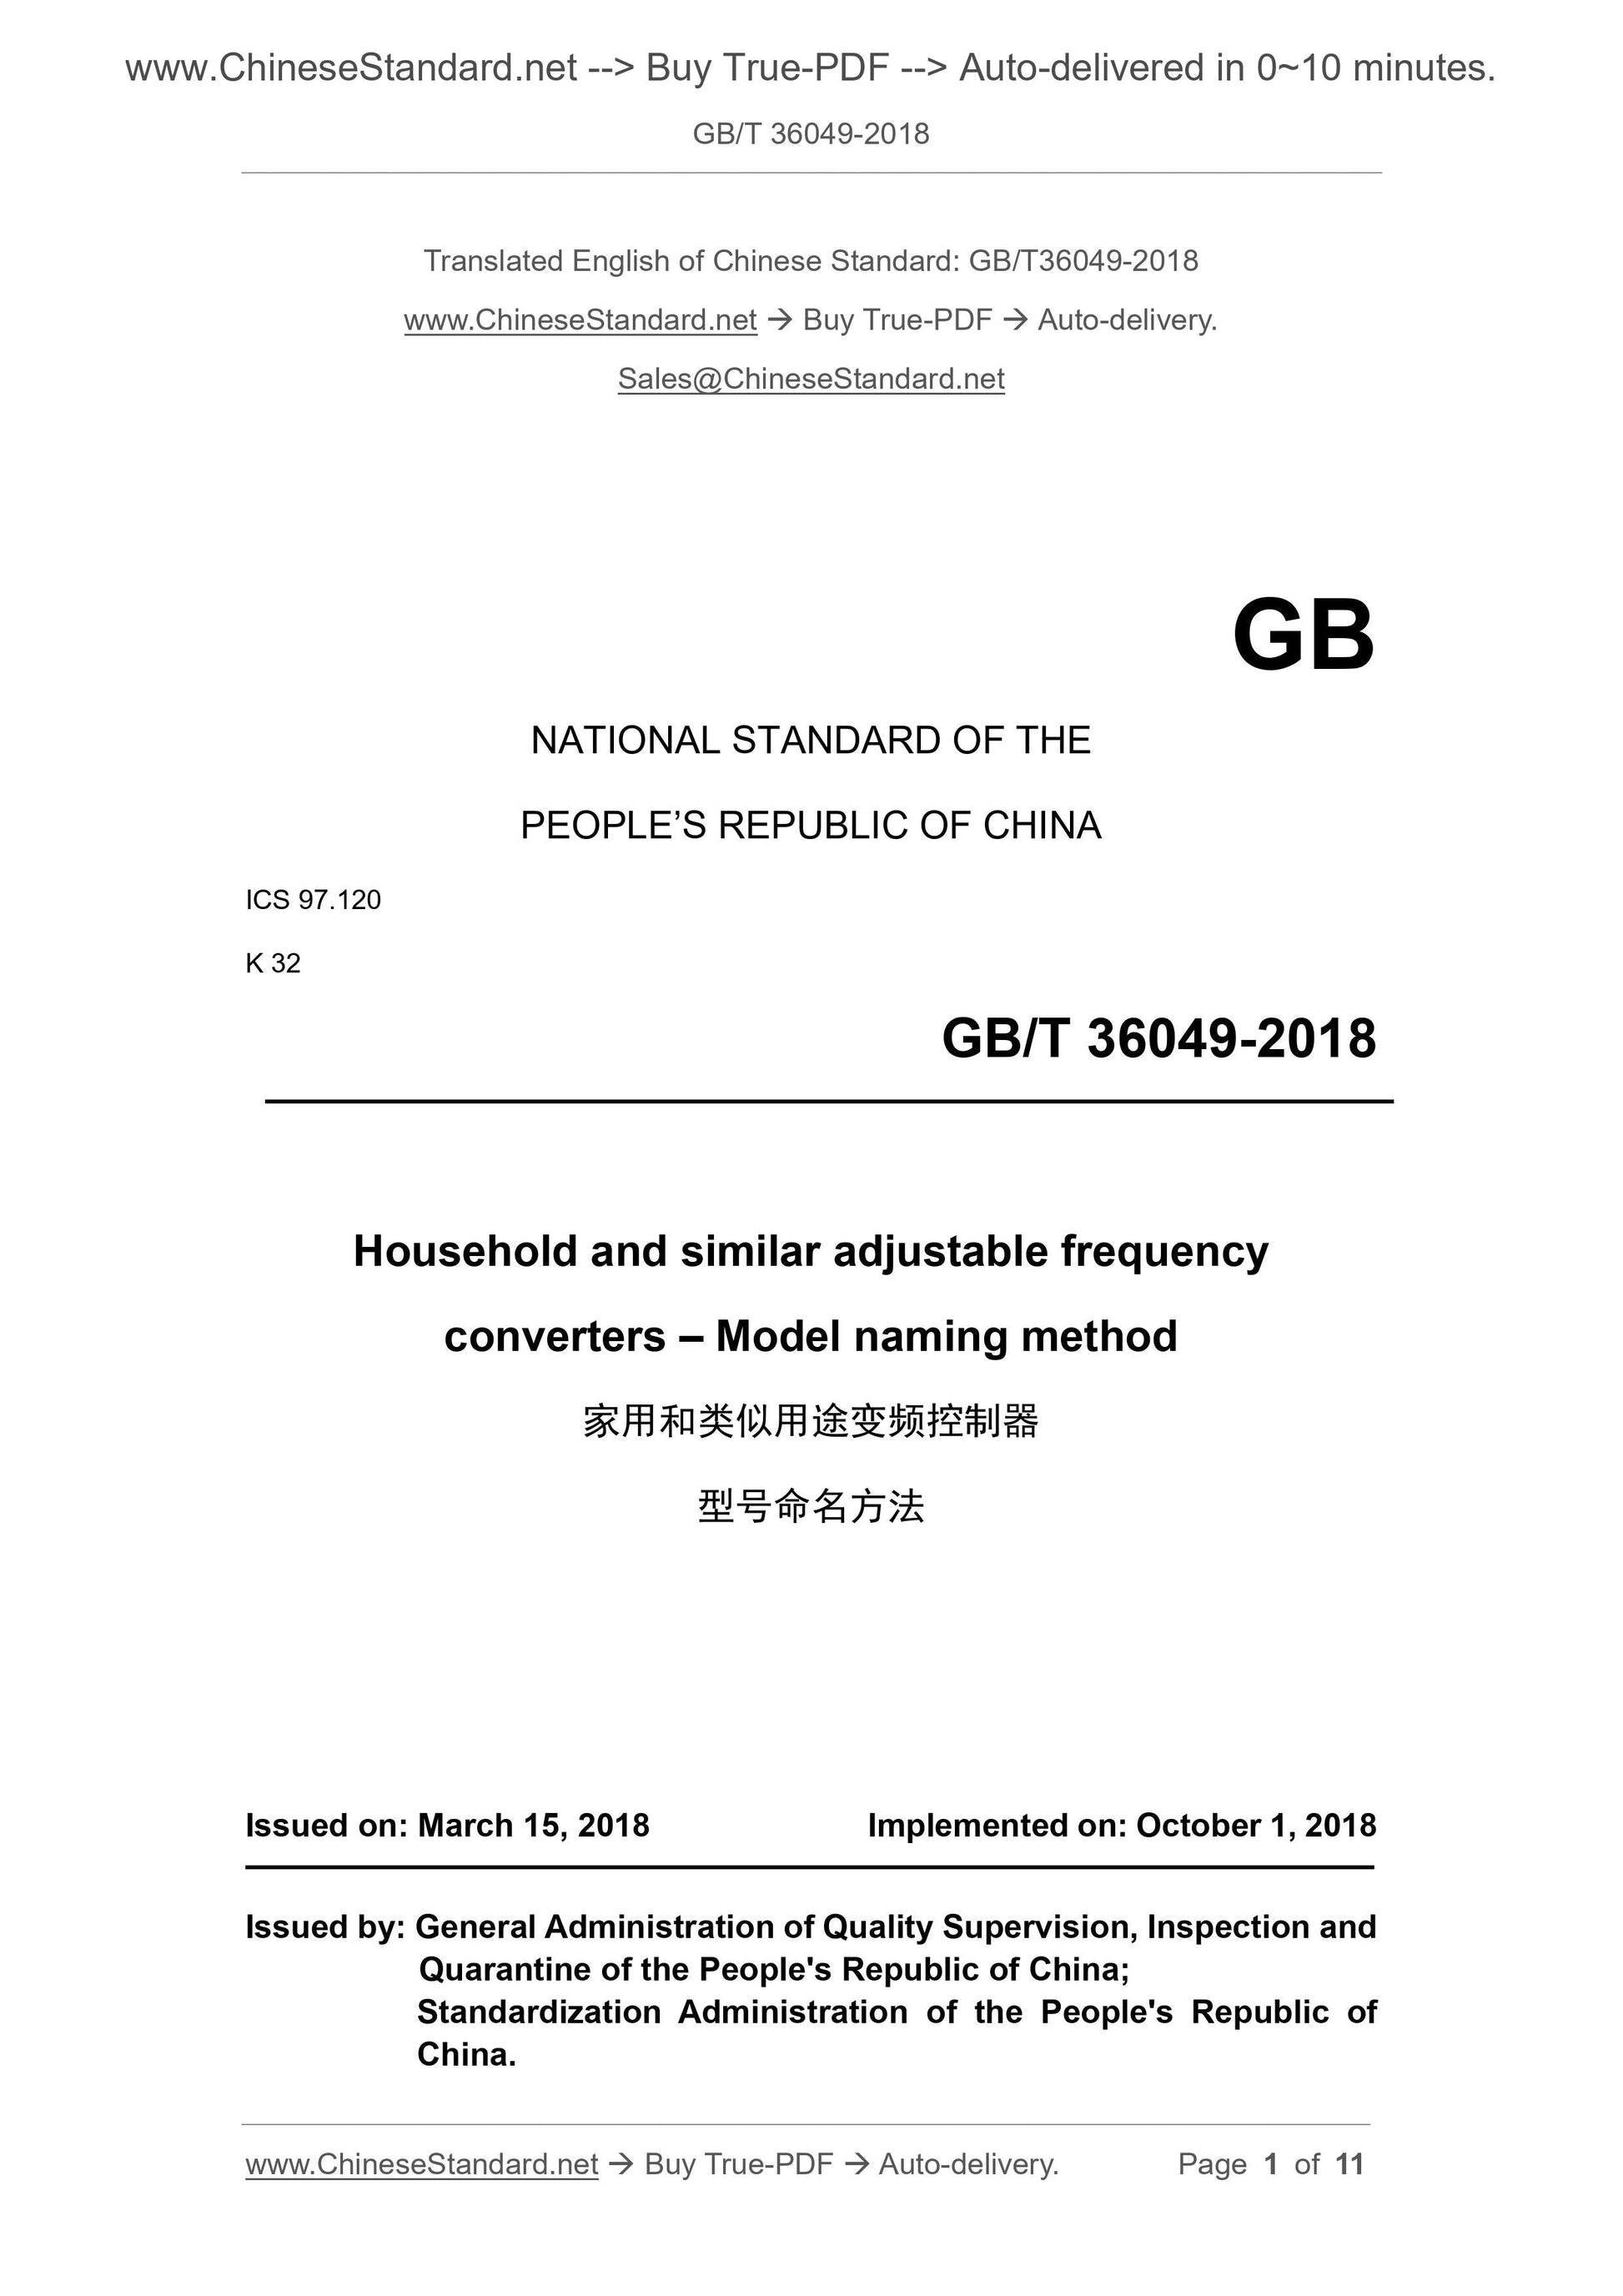 GB/T 36049-2018 Page 1